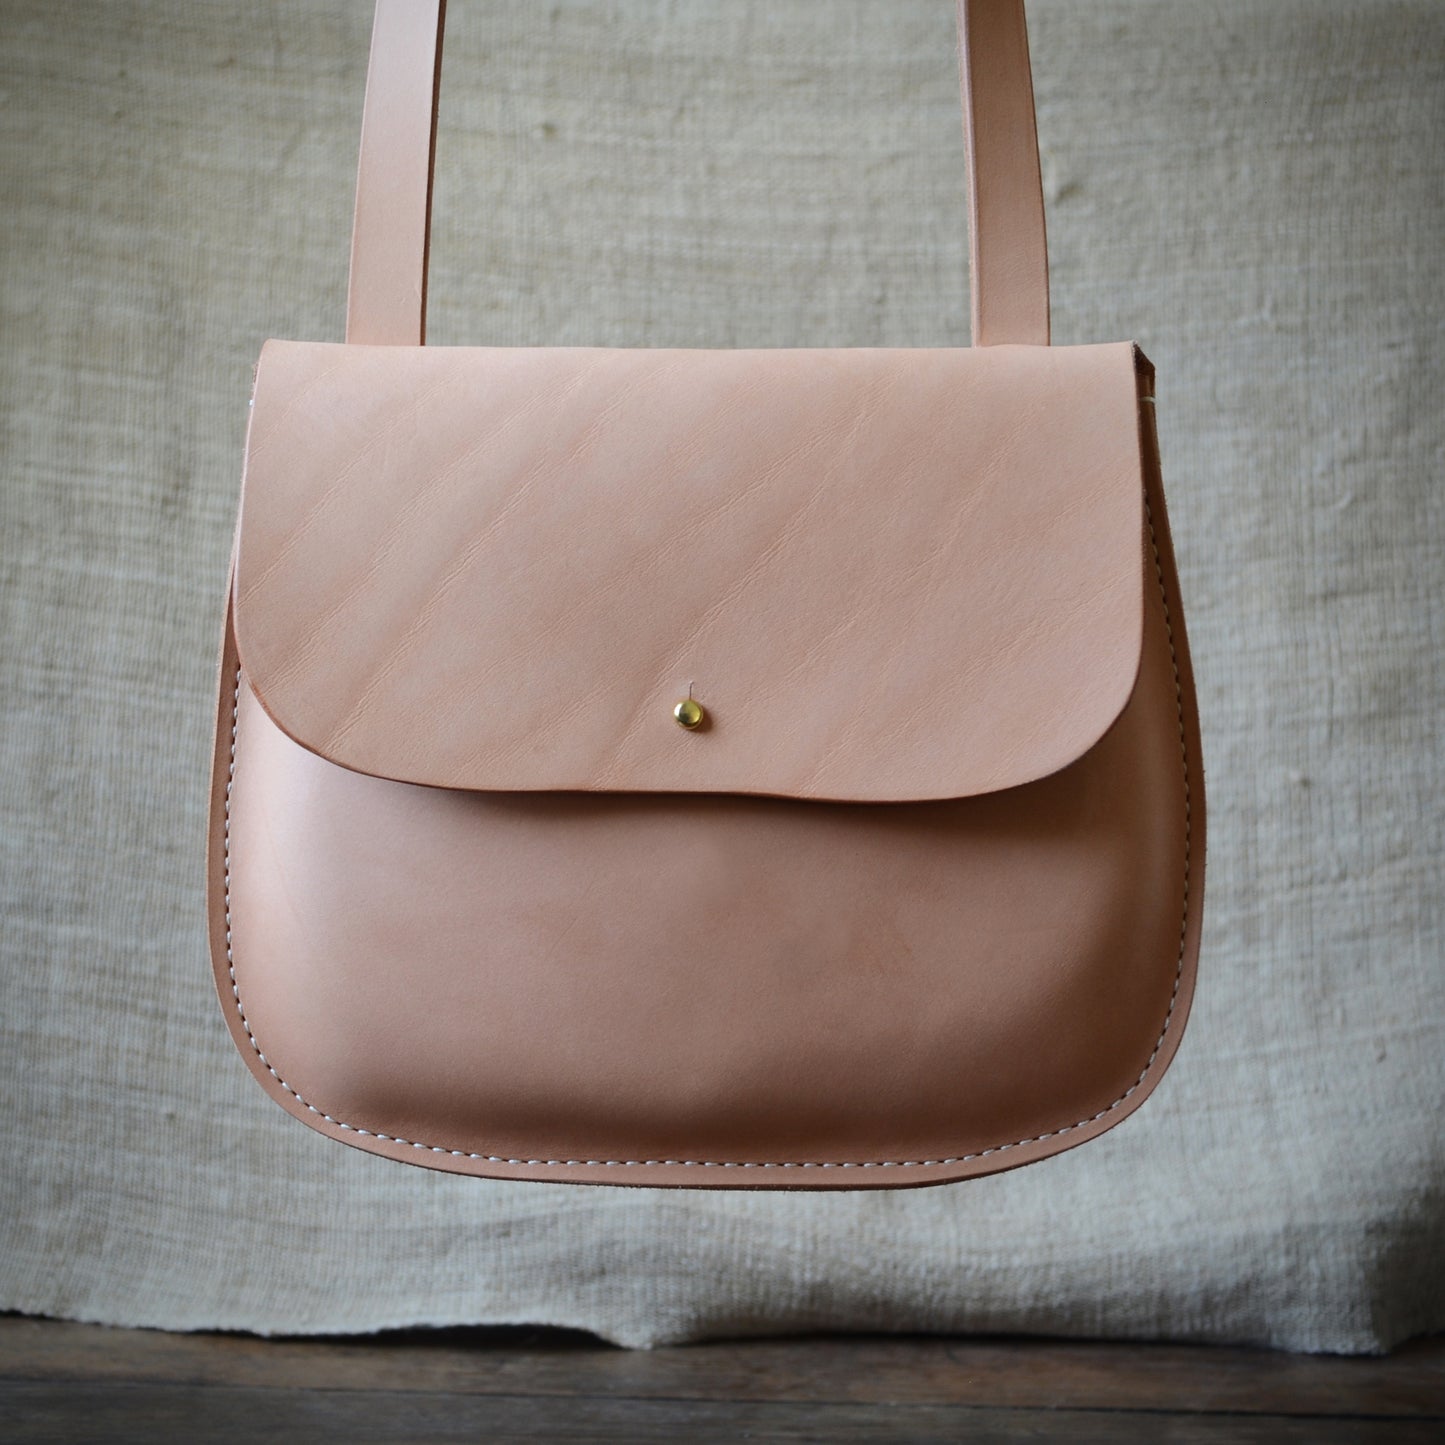 A natural color crossbody bag hangs in front of a woven  tan cloth